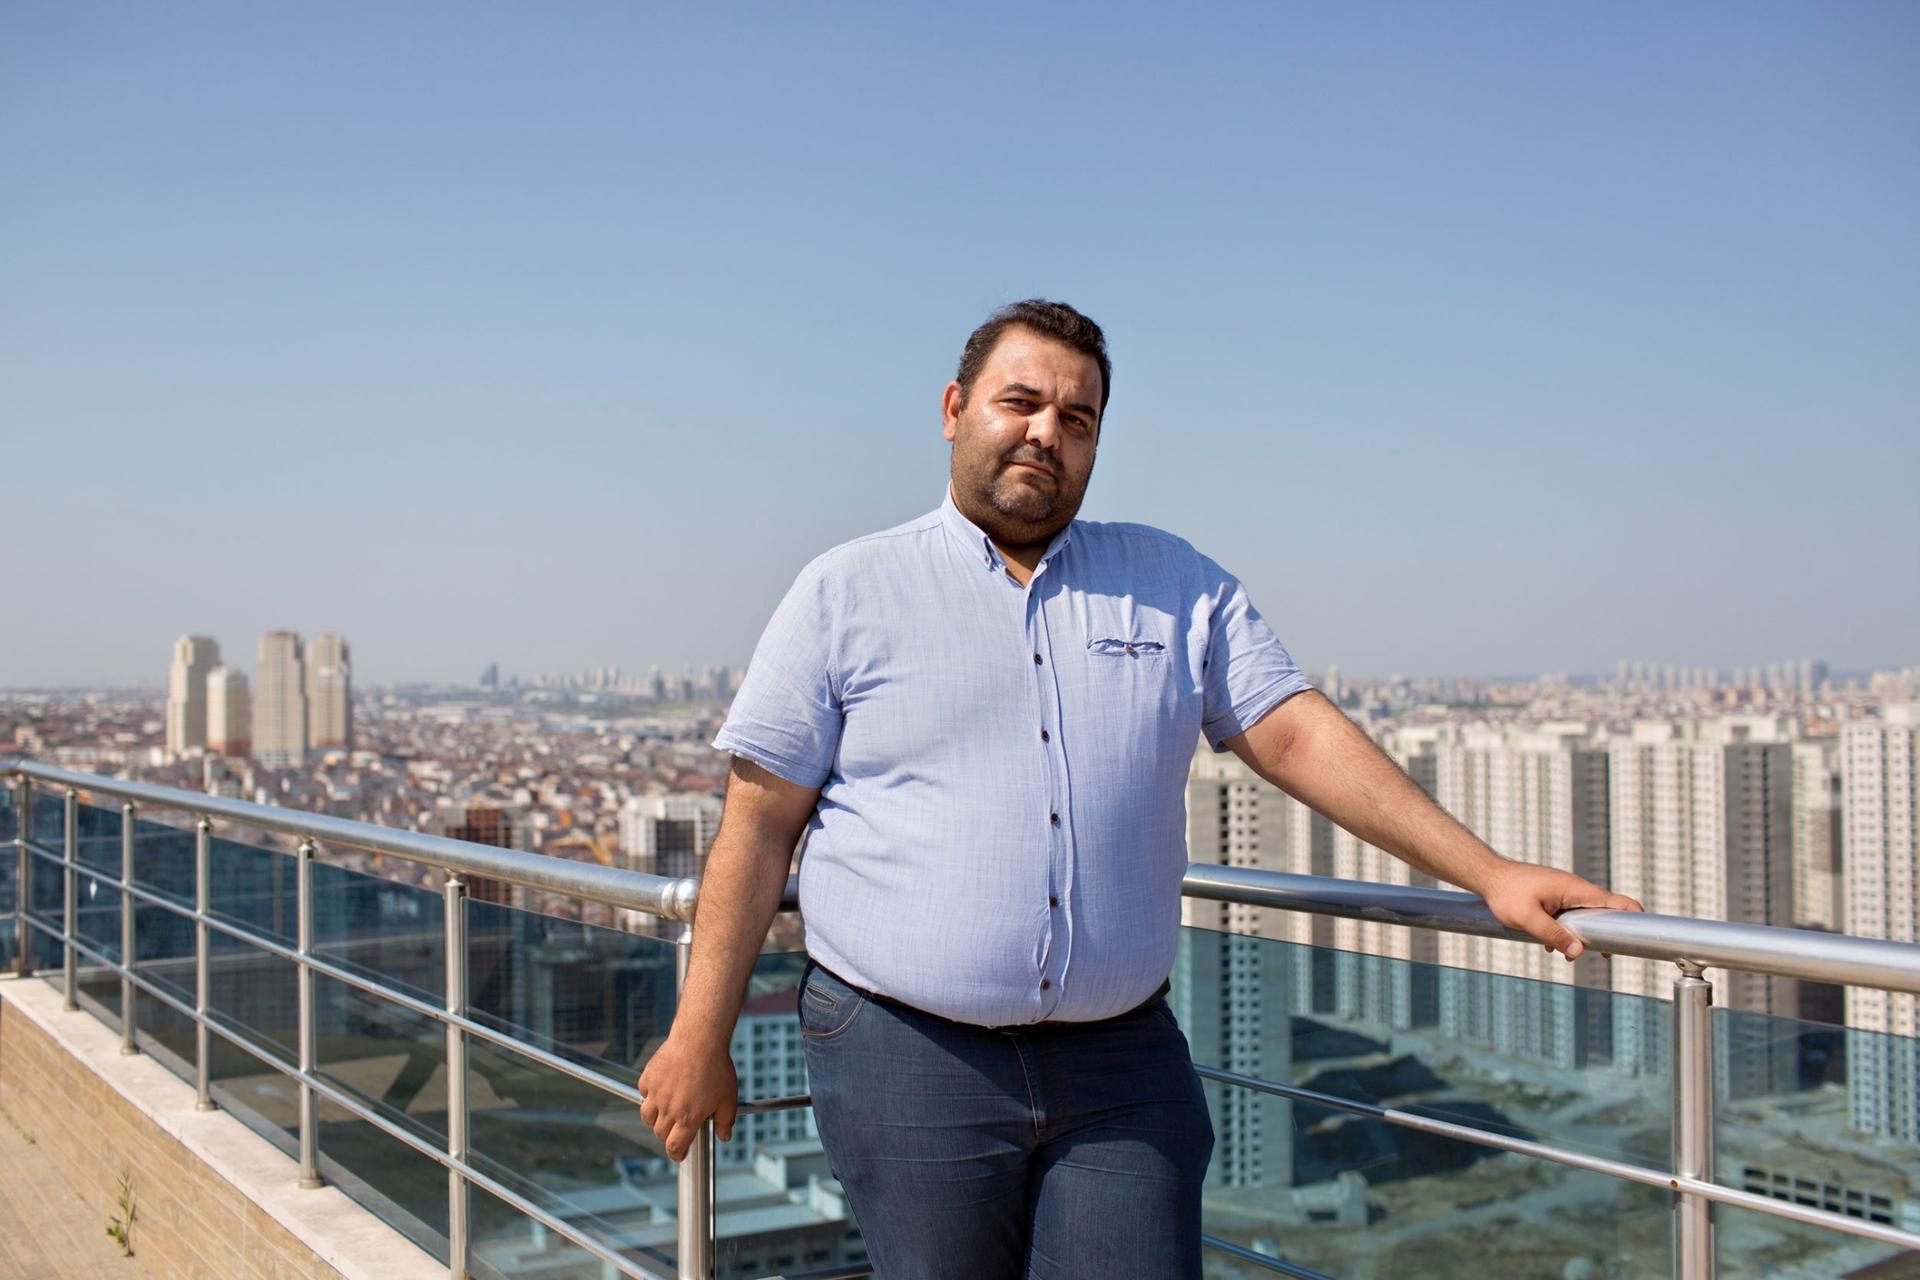 A man is shown in a blue button down shirt and jeans leaning against the railing of a rooftop deck.